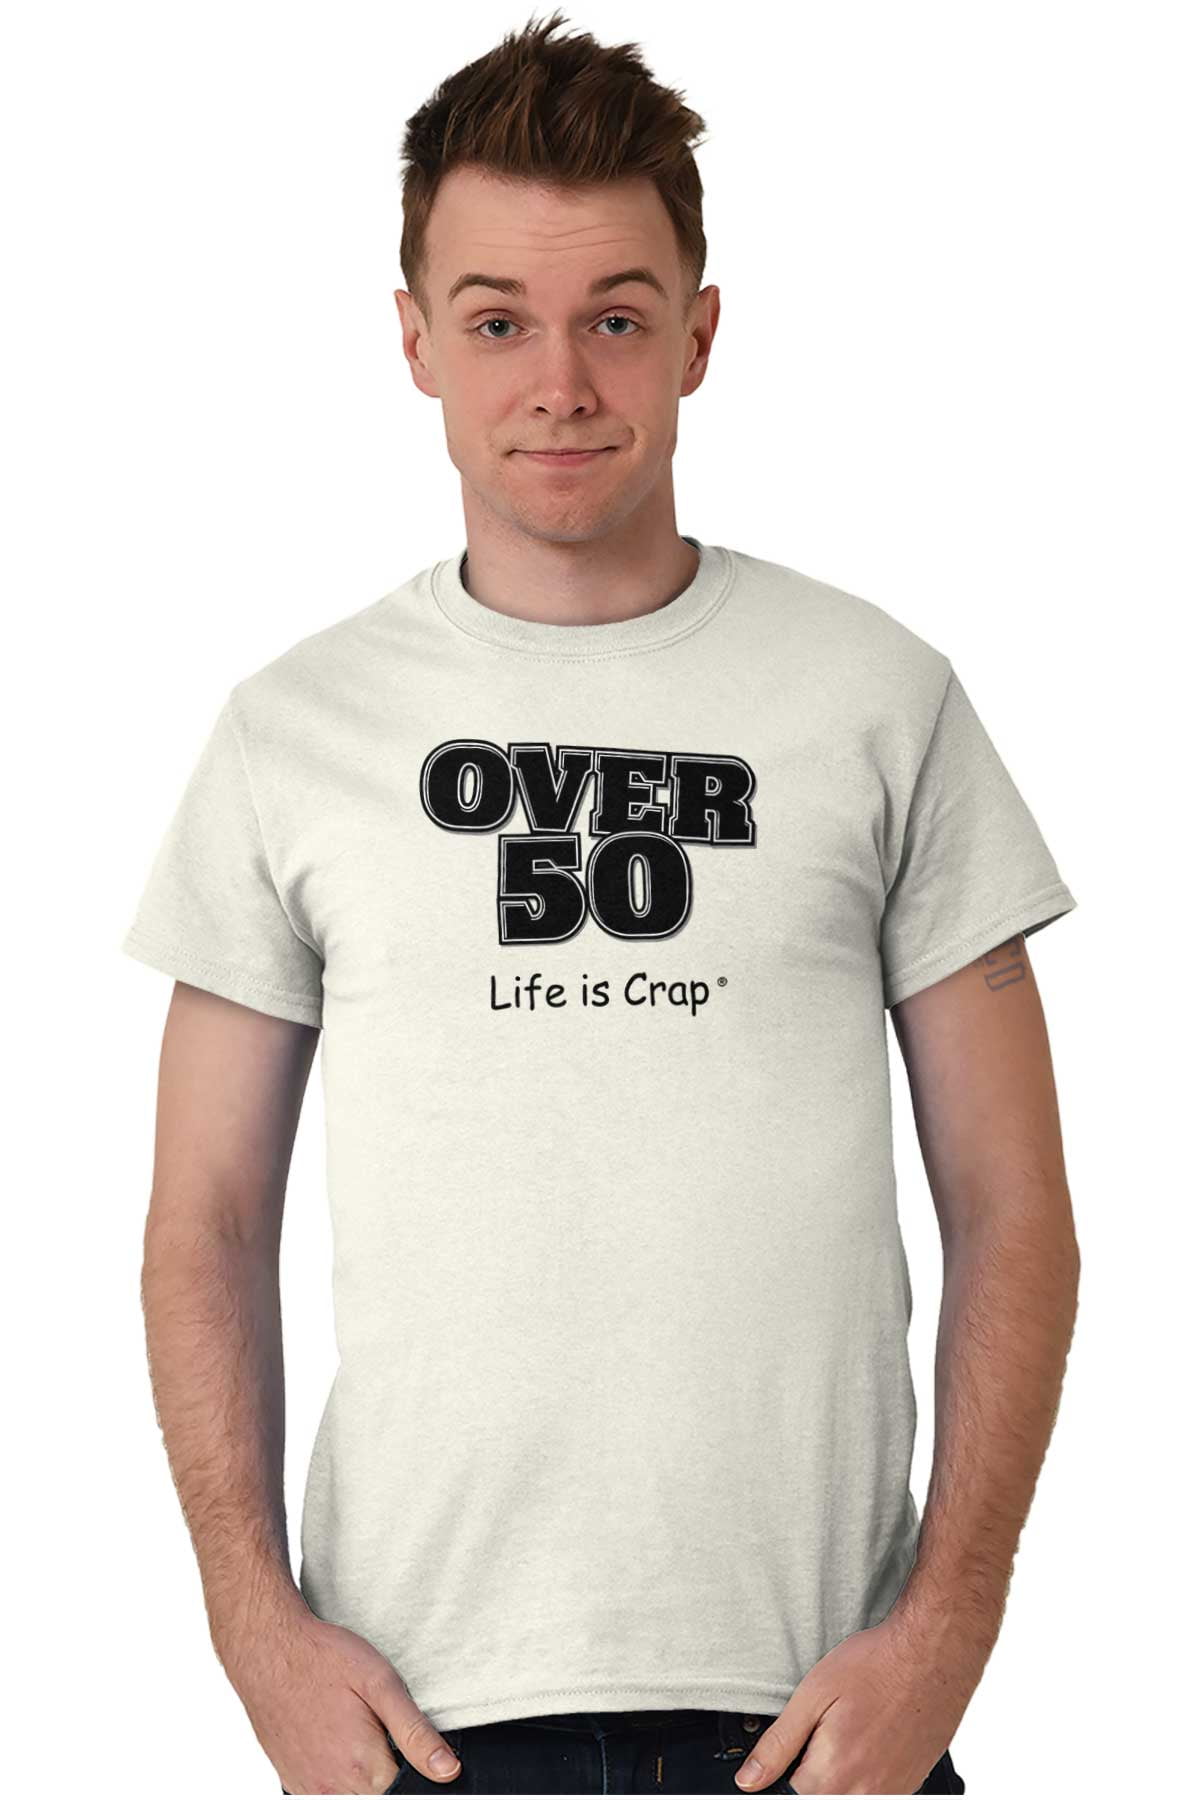 Spicy Cold Apparel Life is Either T-Shirt Graphic Shirts Funny Unisex Shirt